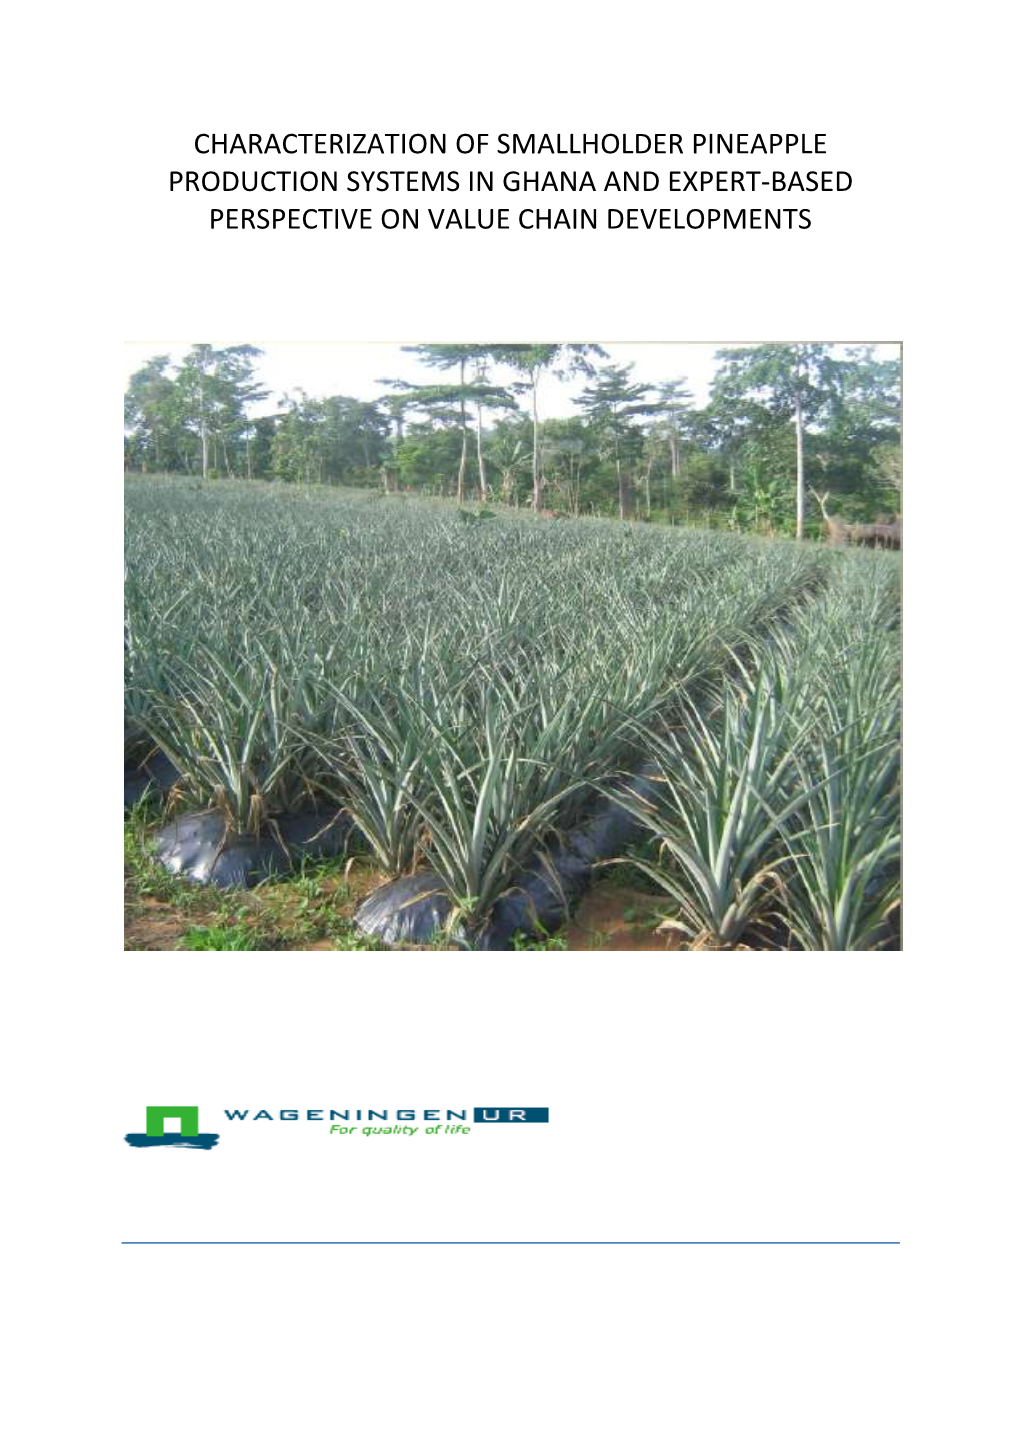 Characterization of Smallholder Pineapple Production Systems in Ghana and Expert-Based Perspective on Value Chain Developments